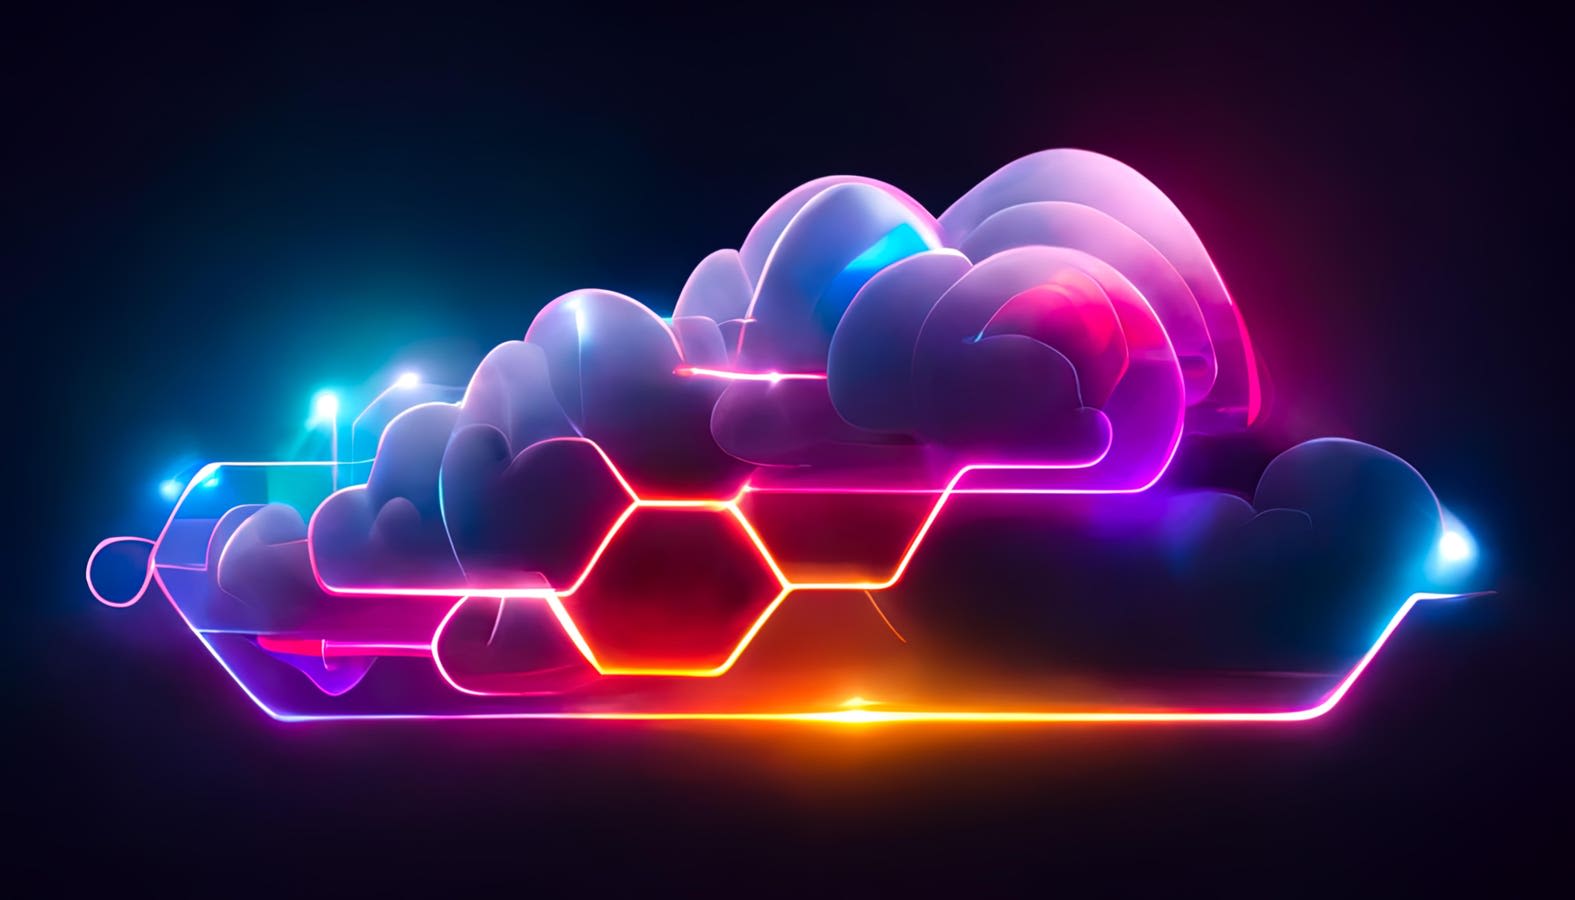 Council Post: Optimizing The Public Cloud: Four Keys To Becoming A Future-Ready Company